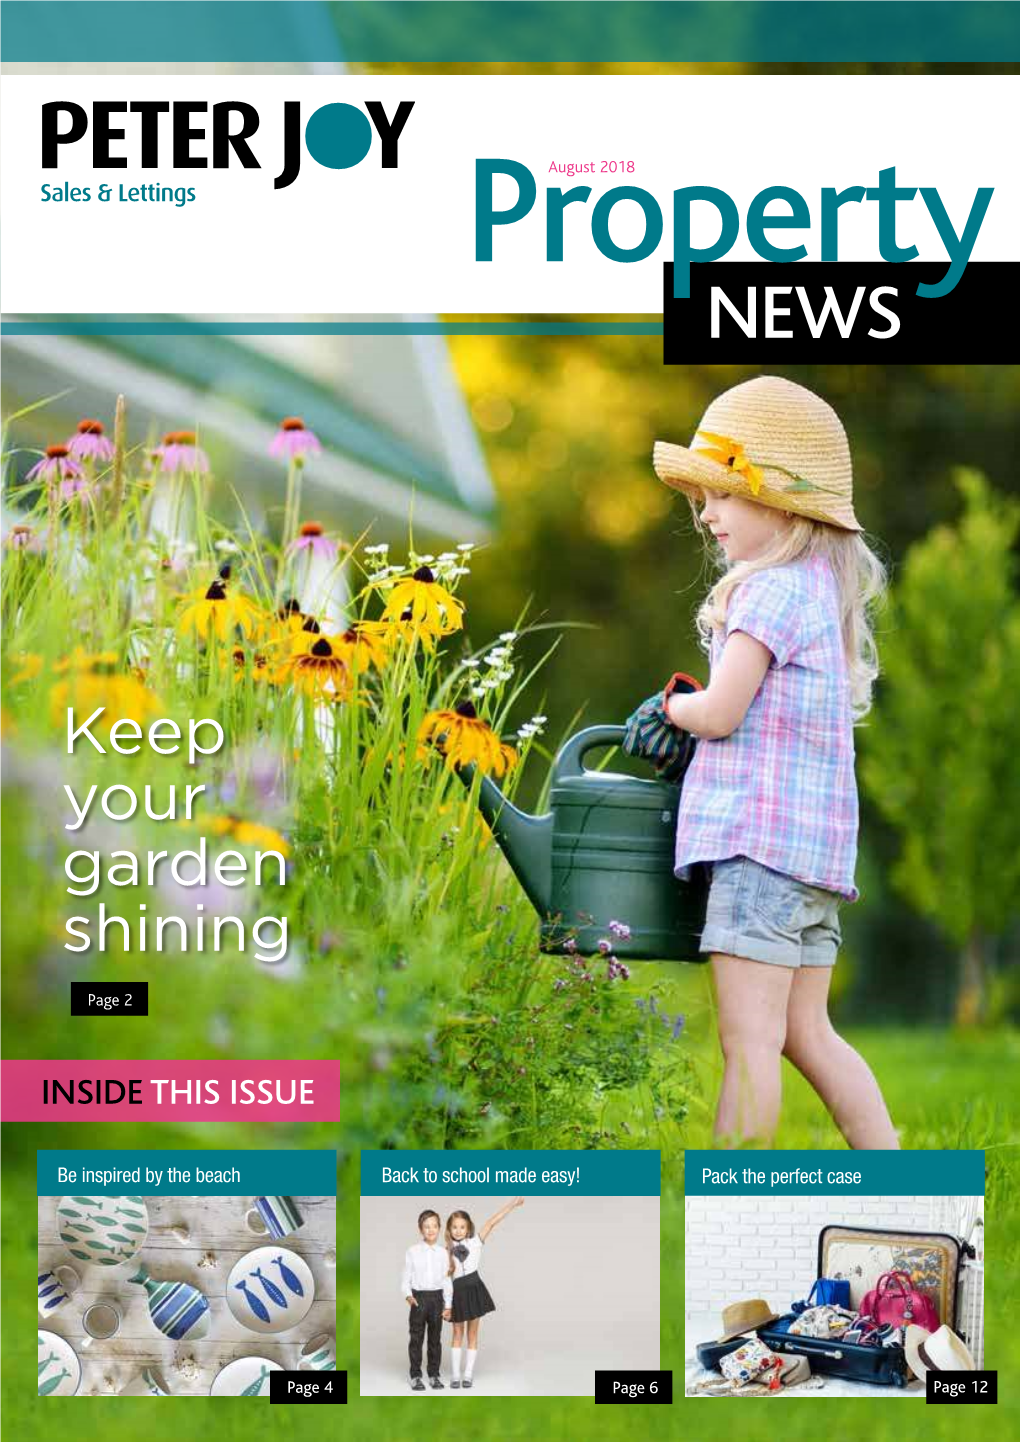 August Property News